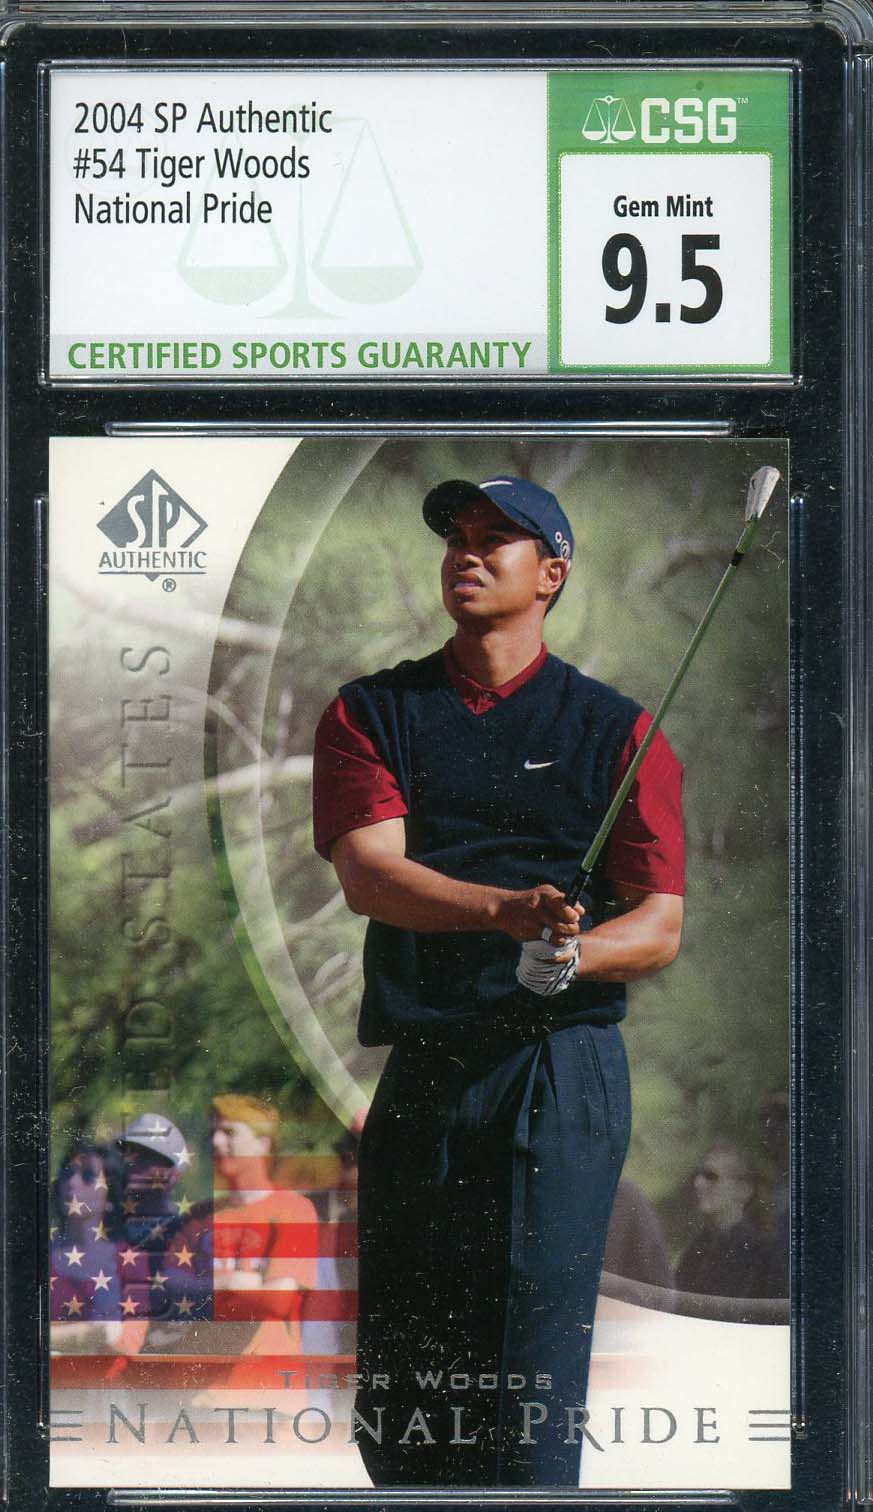 Tiger Woods 2004 SP Authentic National Pride Golf Card #54 Graded CSG 9.5-Powers Sports Memorabilia